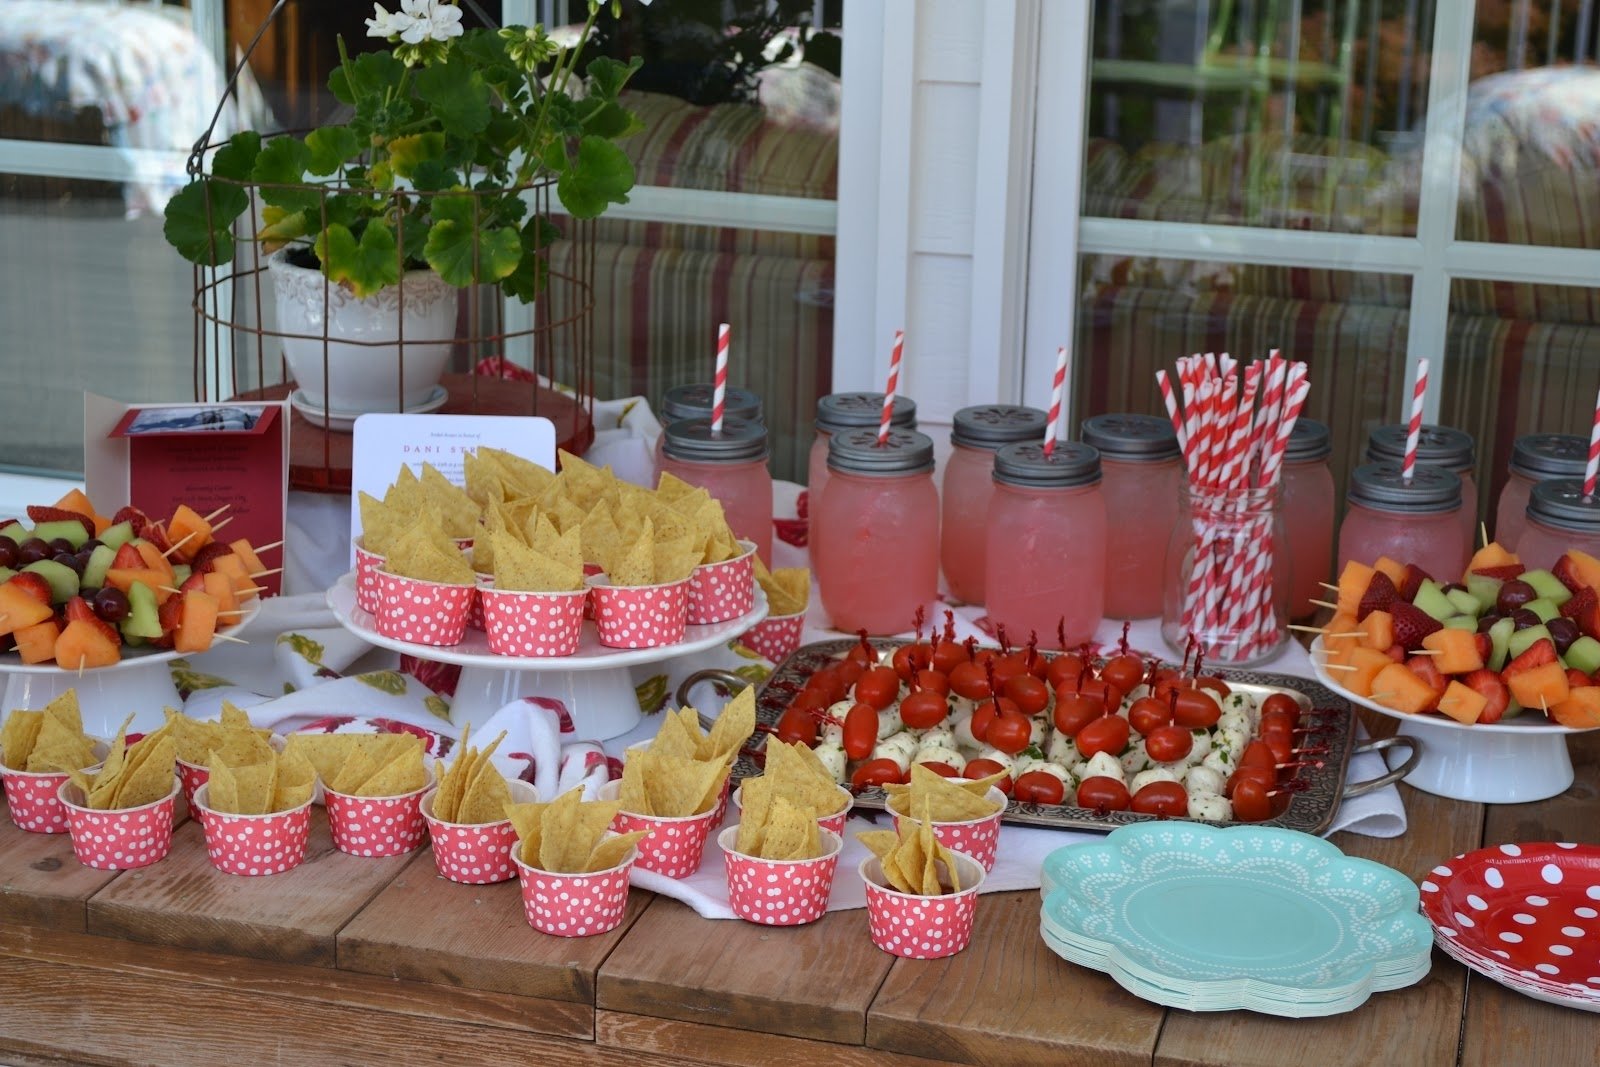 10 Attractive Bridal Shower Ideas On A Budget dsc 0937 1600x1067 baby shower food list ideas on budget a this was 2022